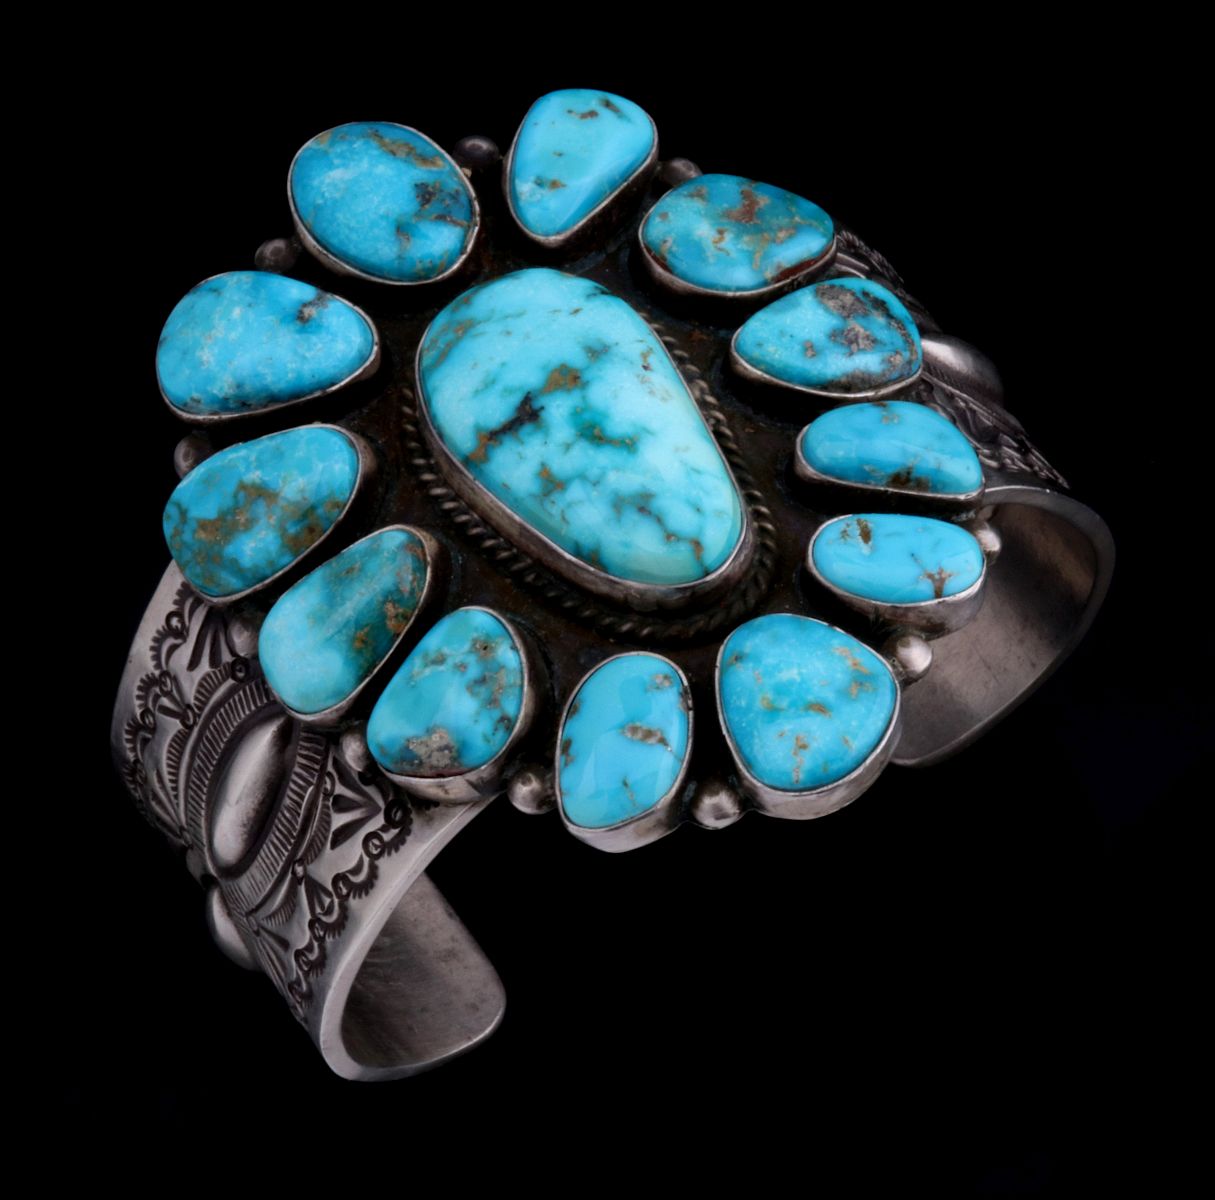 A HERMAN SMITH NAVAJO STERLING AND TURQUOISE CUFF